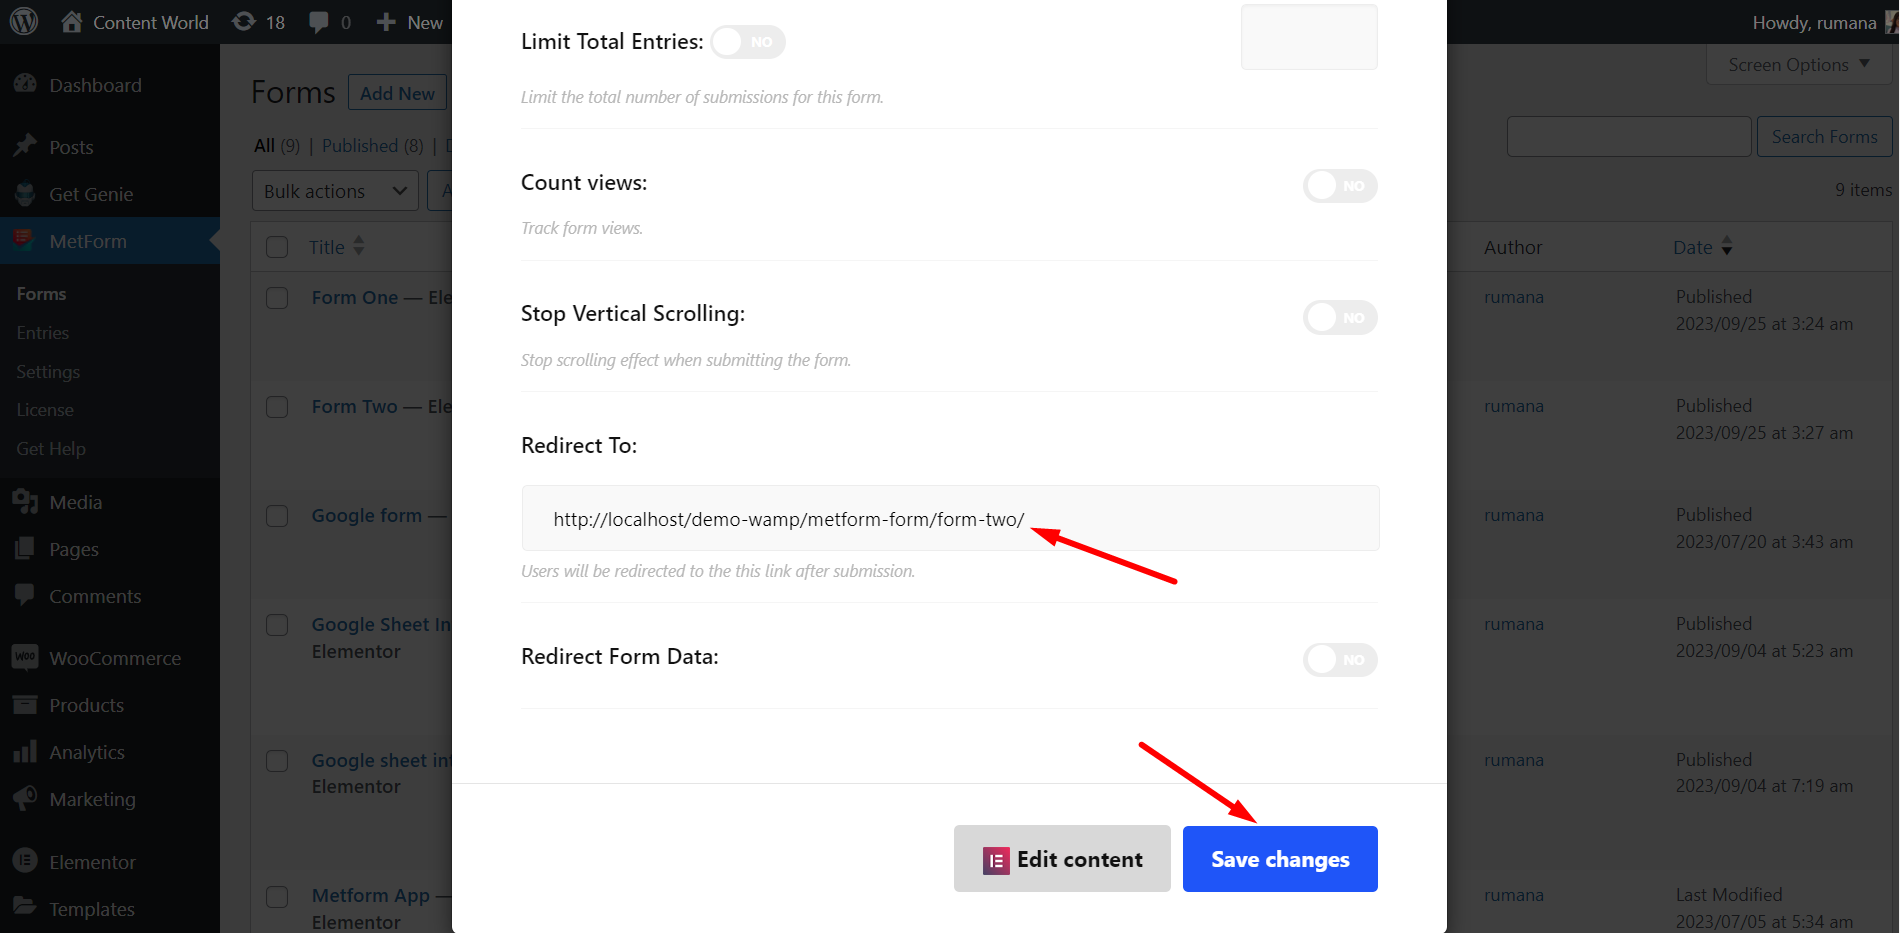 Redirect link to pass data to another form